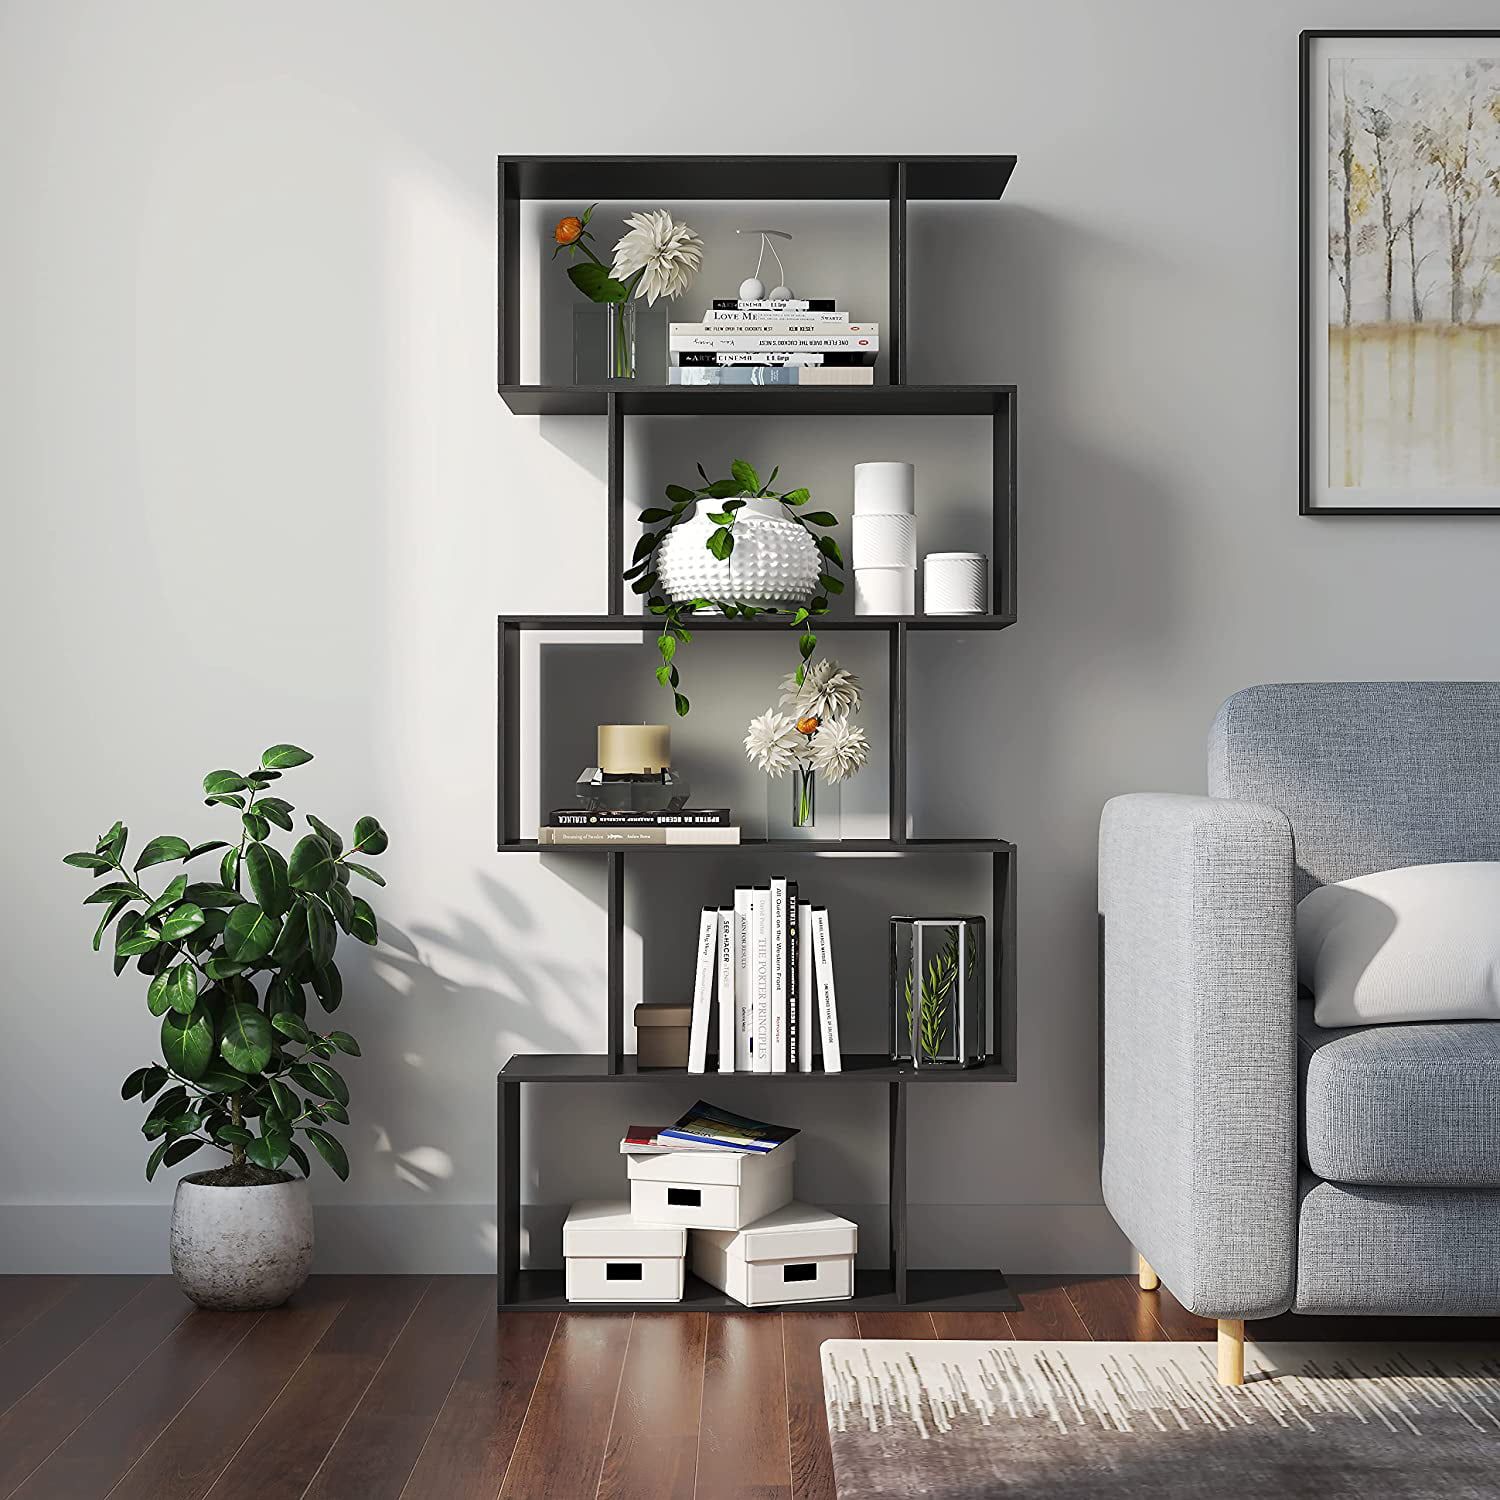 Homefort Geometric Bookcase, 5 Tier Wooden S Shaped Storage Bookcase,  Display Bookshelf, Black, Brown Or White – Walmart With Regard To Geometric Bookcases (View 11 of 15)